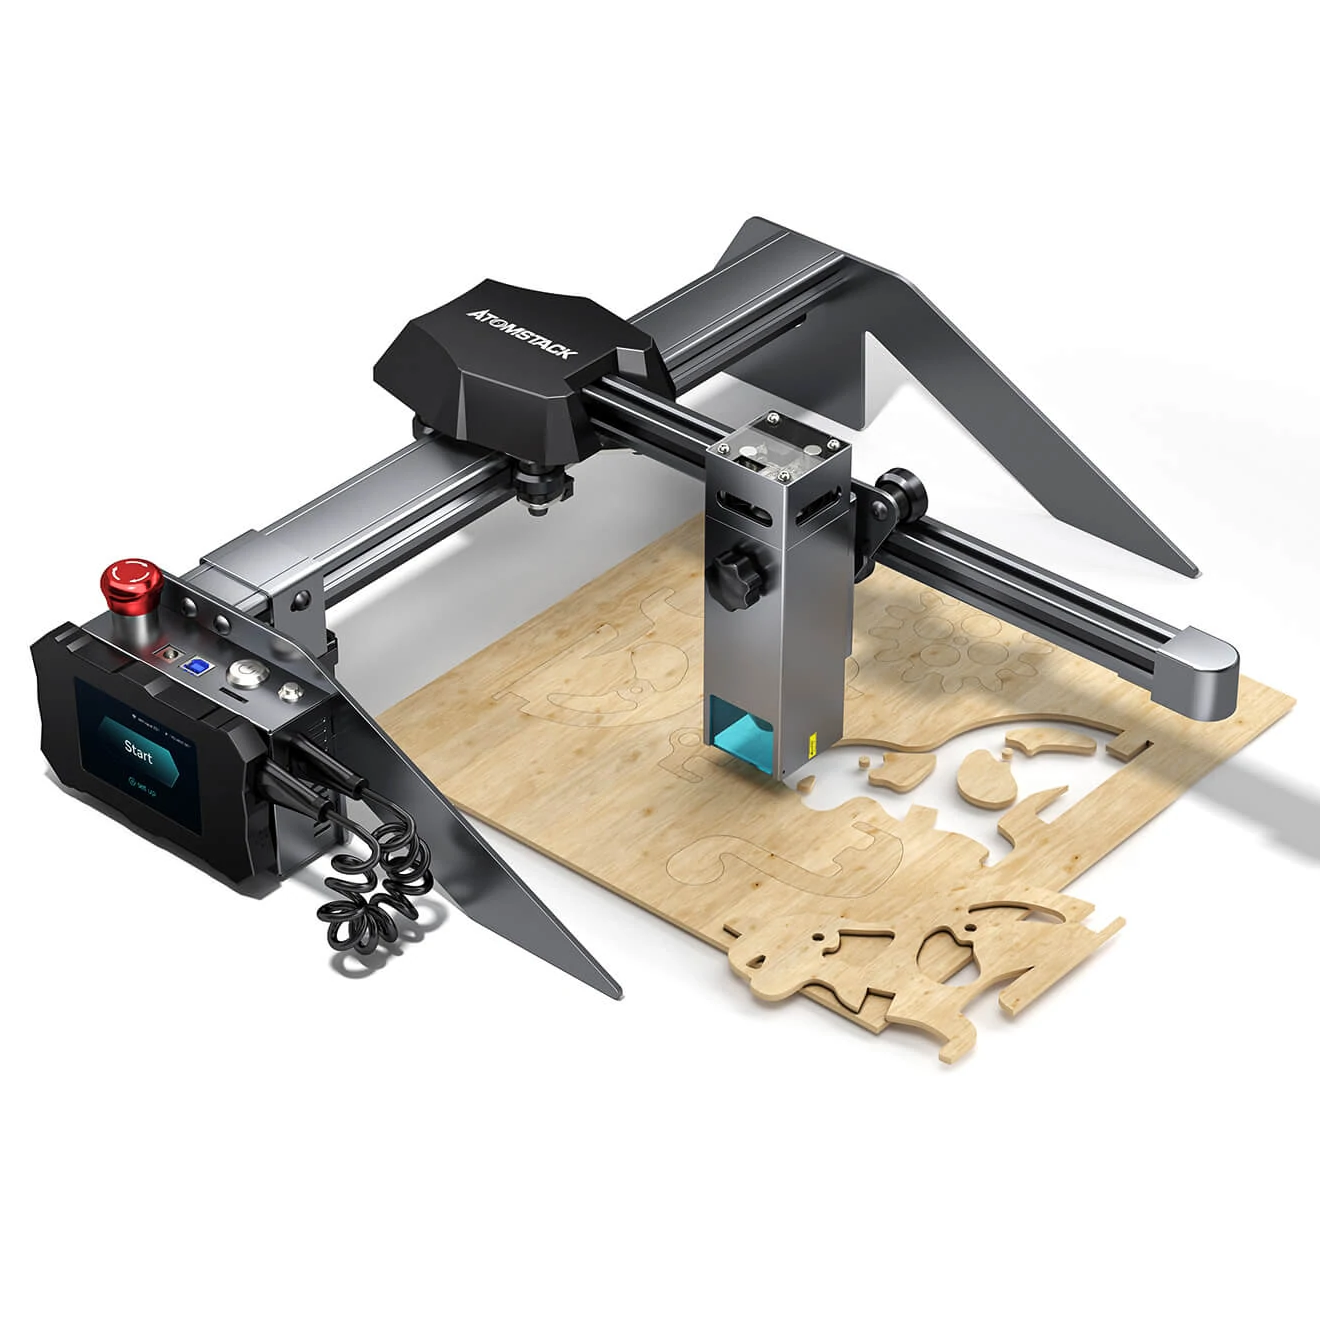 P9 M50 laser cutter and engraver